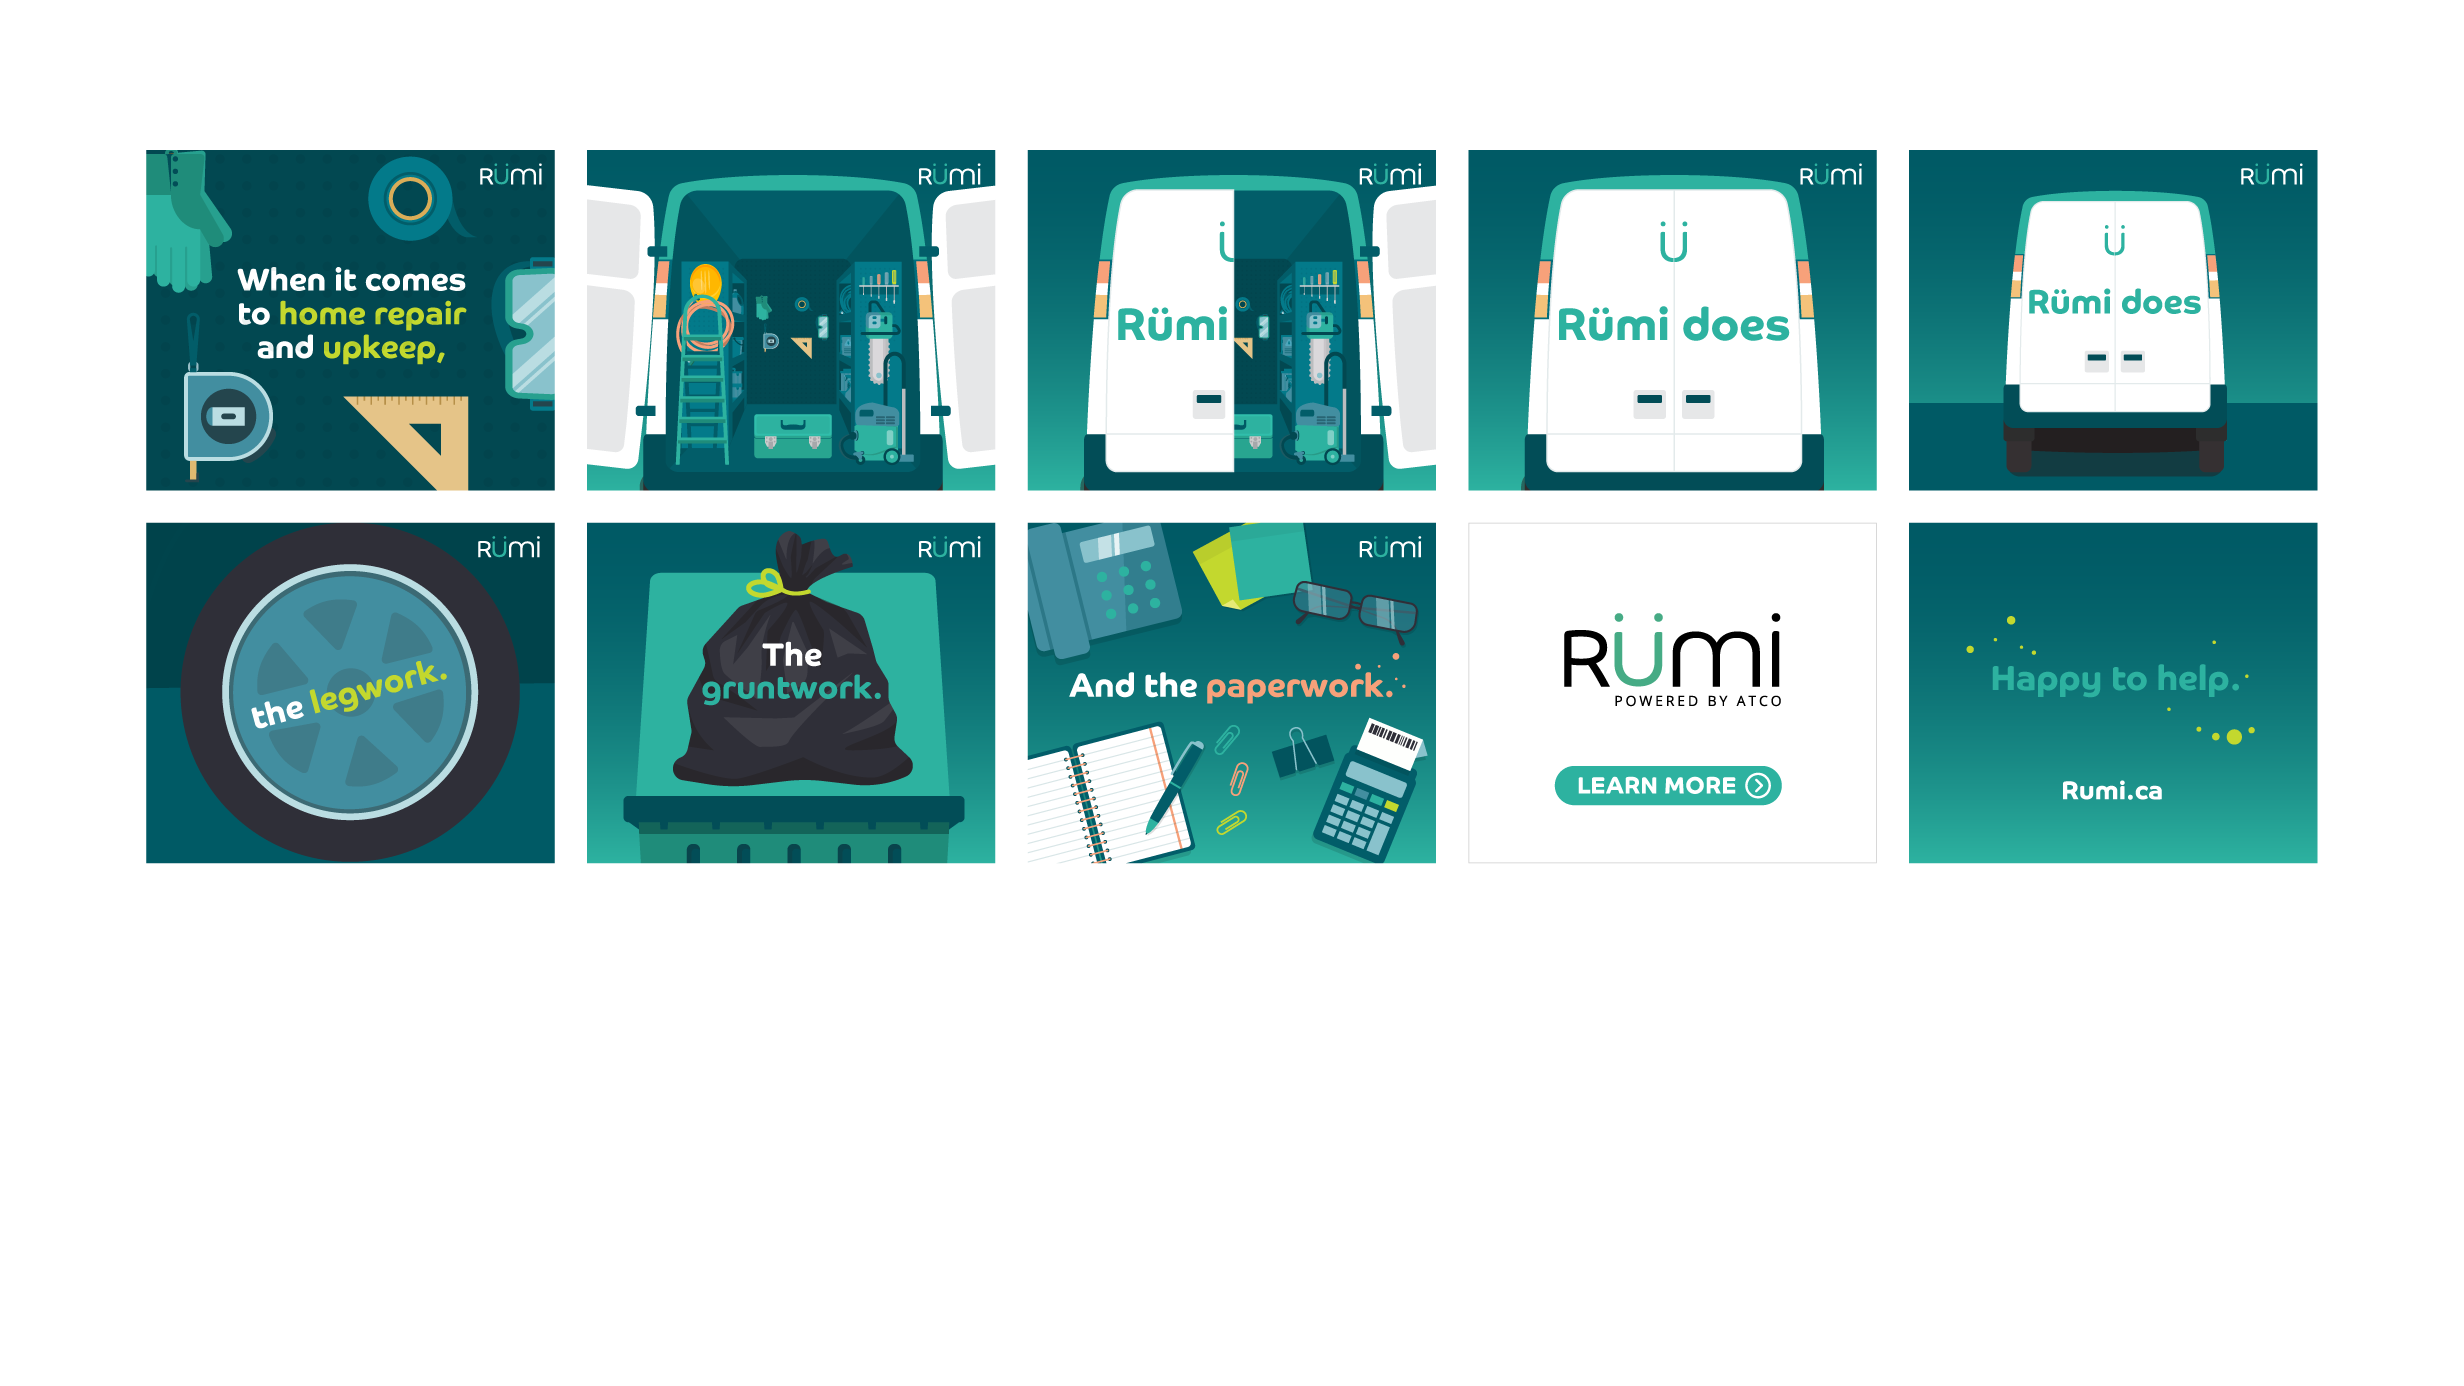 A high-fidelity, illustrative storyboard showing a theme for Rumi services